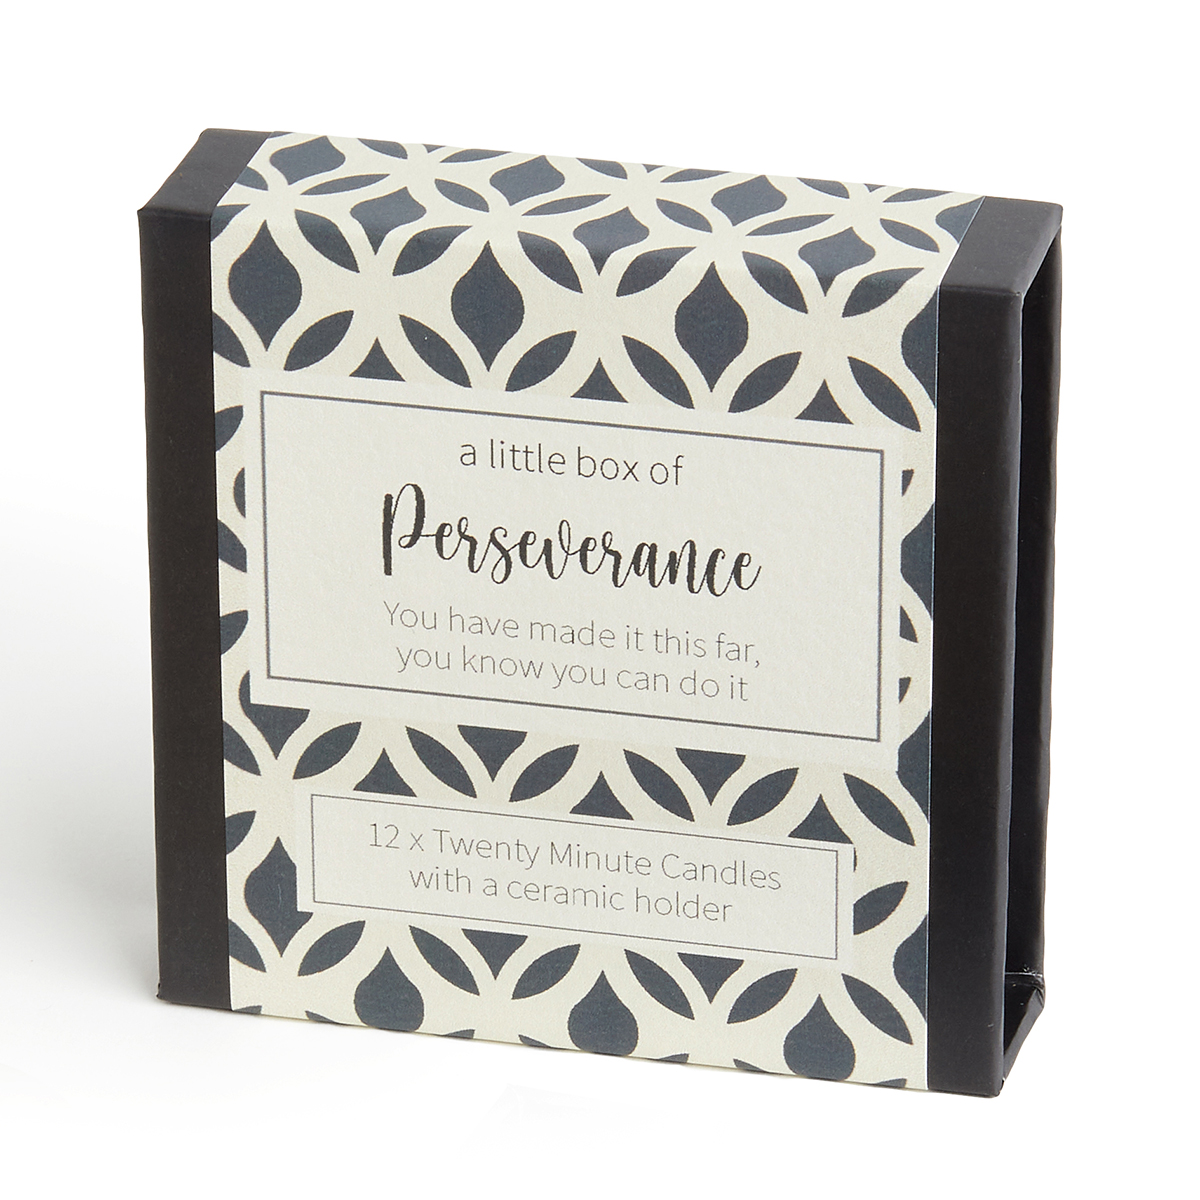 A little box of Perseverance Candles